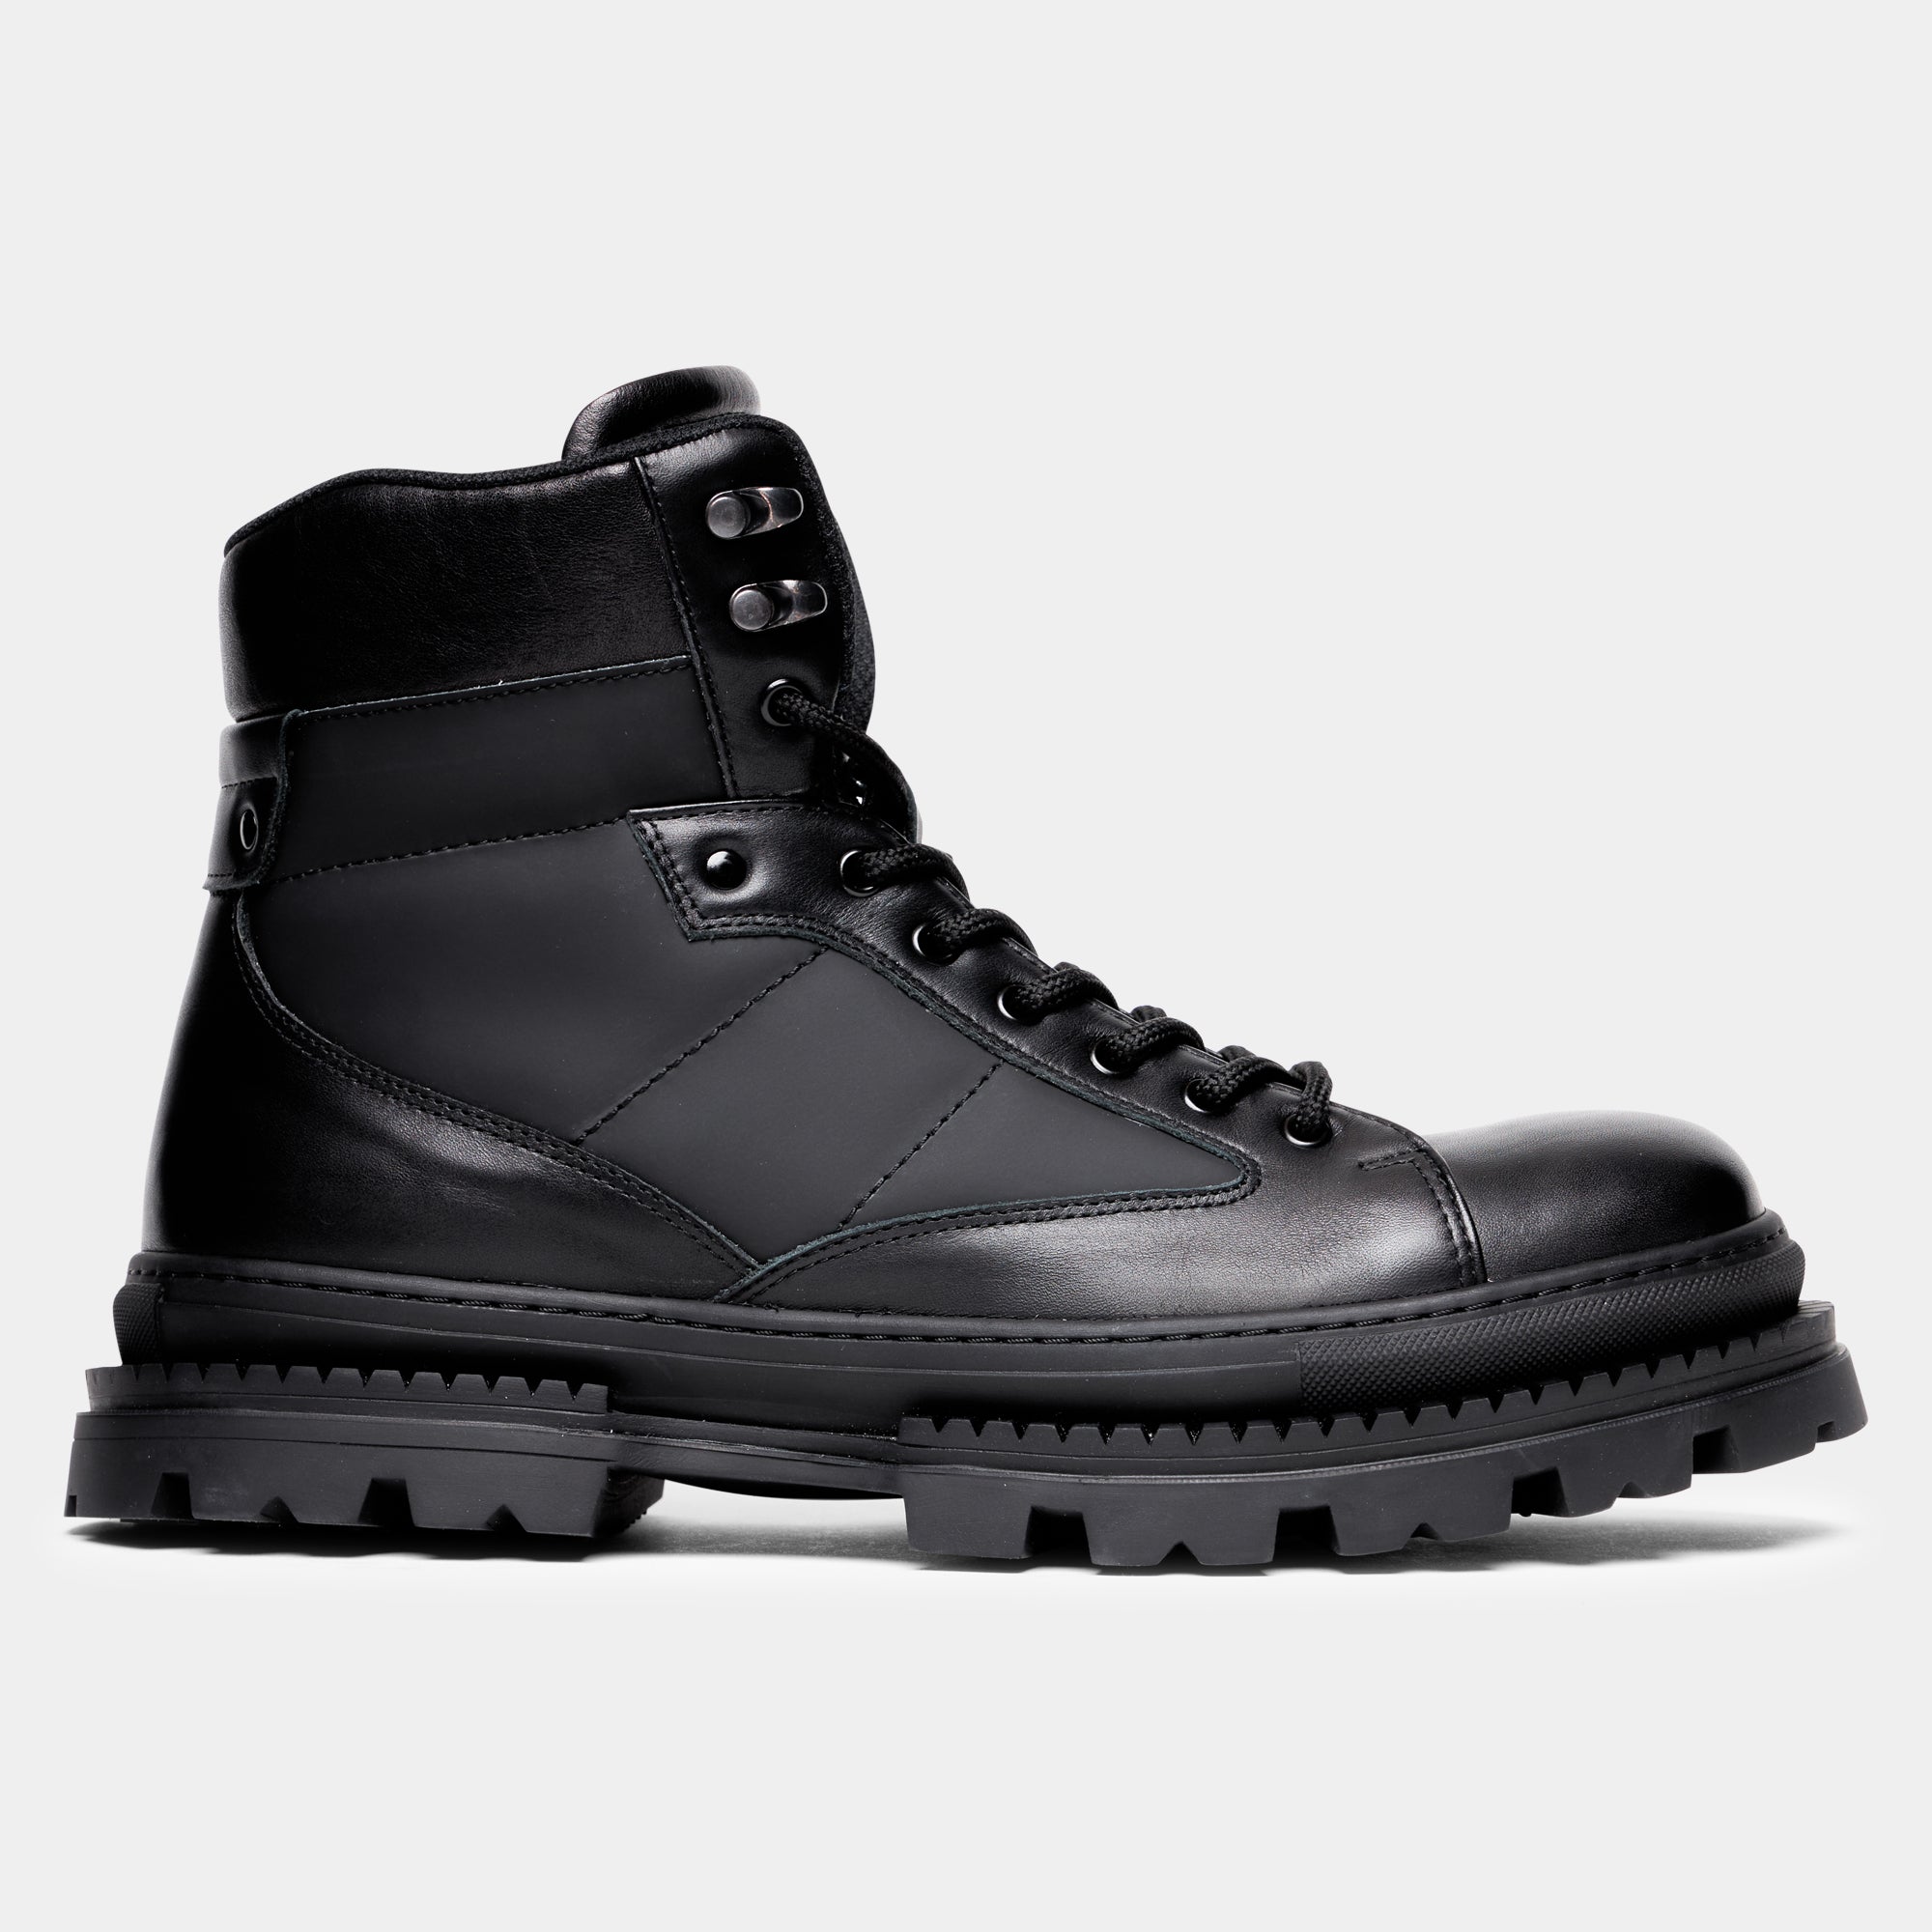 Ahler 99992 Laced boot Black